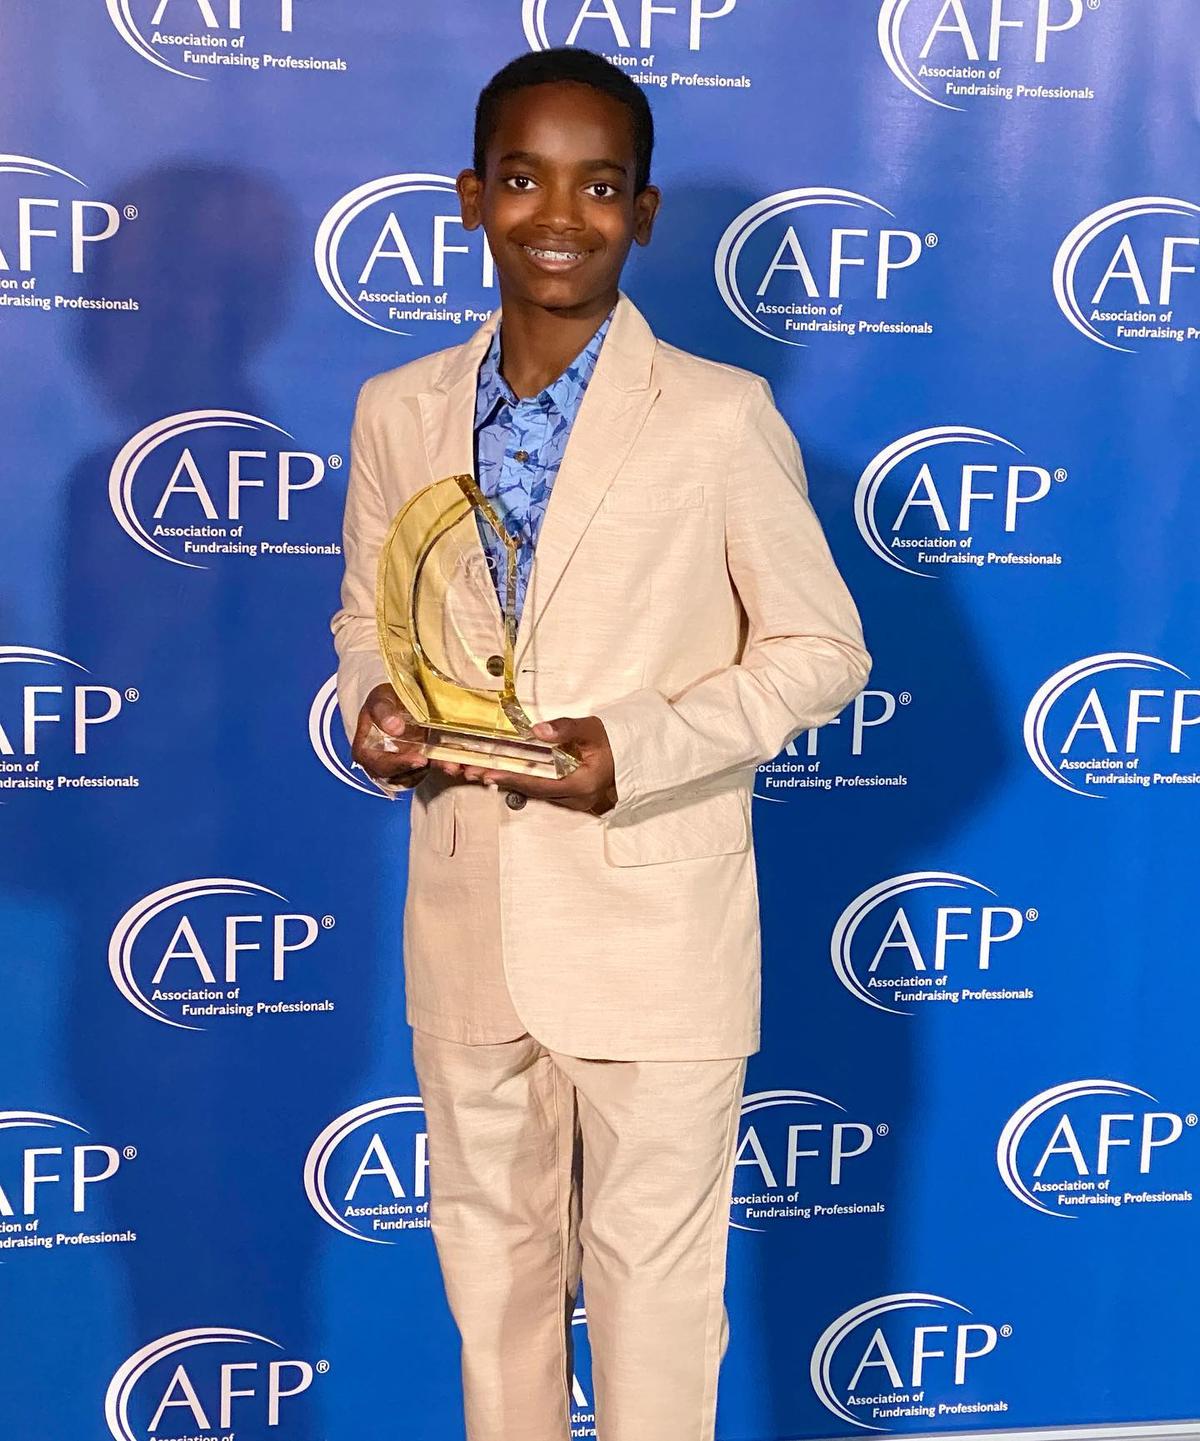 Larson received the William R. Simms Award for Outstanding Youth in Philanthropy. (Courtesy of <a href="https://jonahhands.com/">Jonah’s Hands</a>)